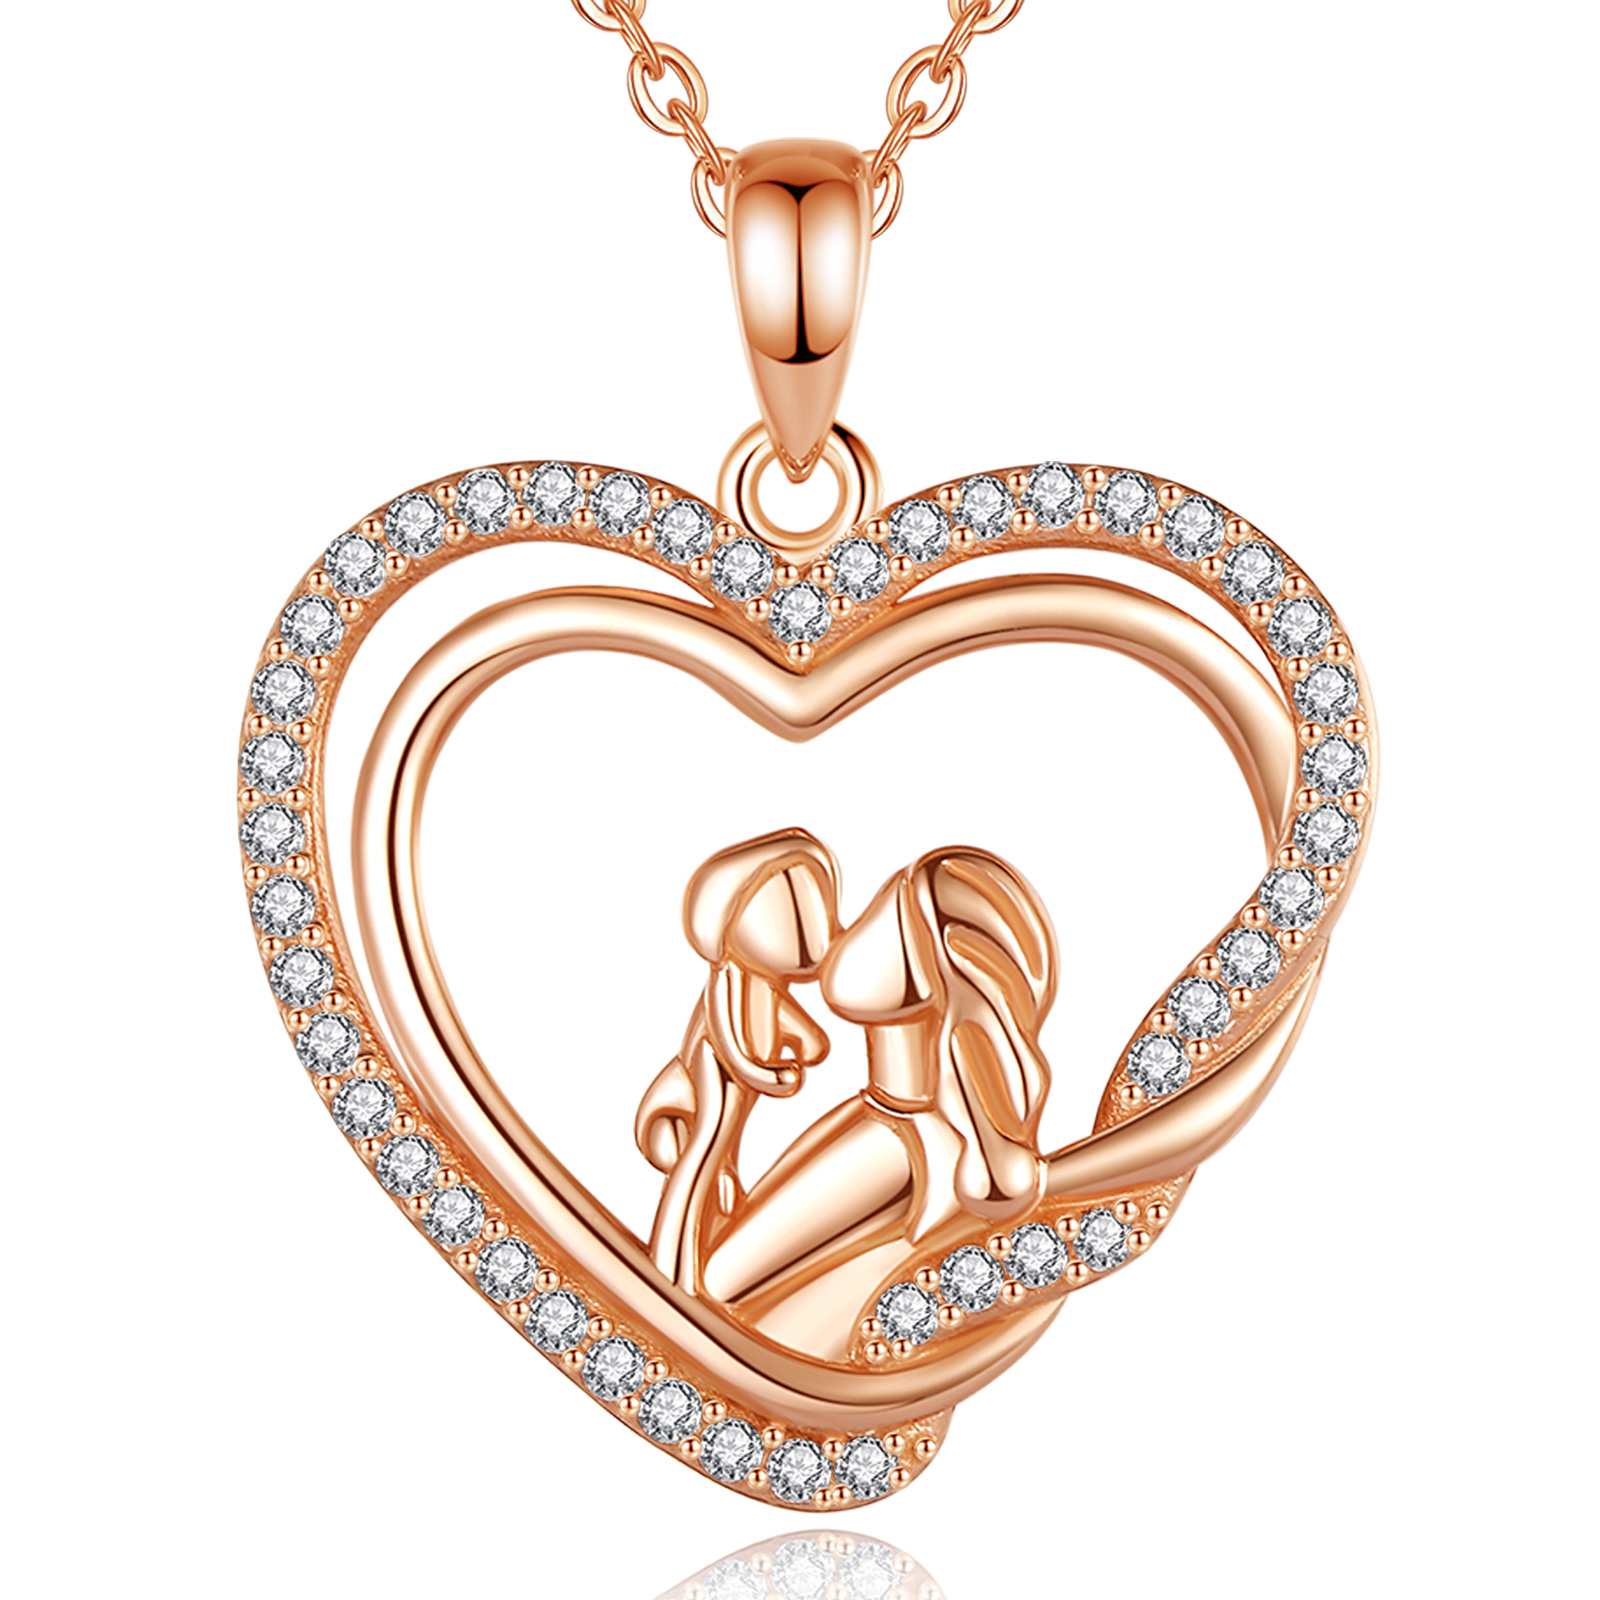 Merryshine Jewelry 925 Sterling Silver Rose Gold Plated Mother and Baby Pendant Necklace